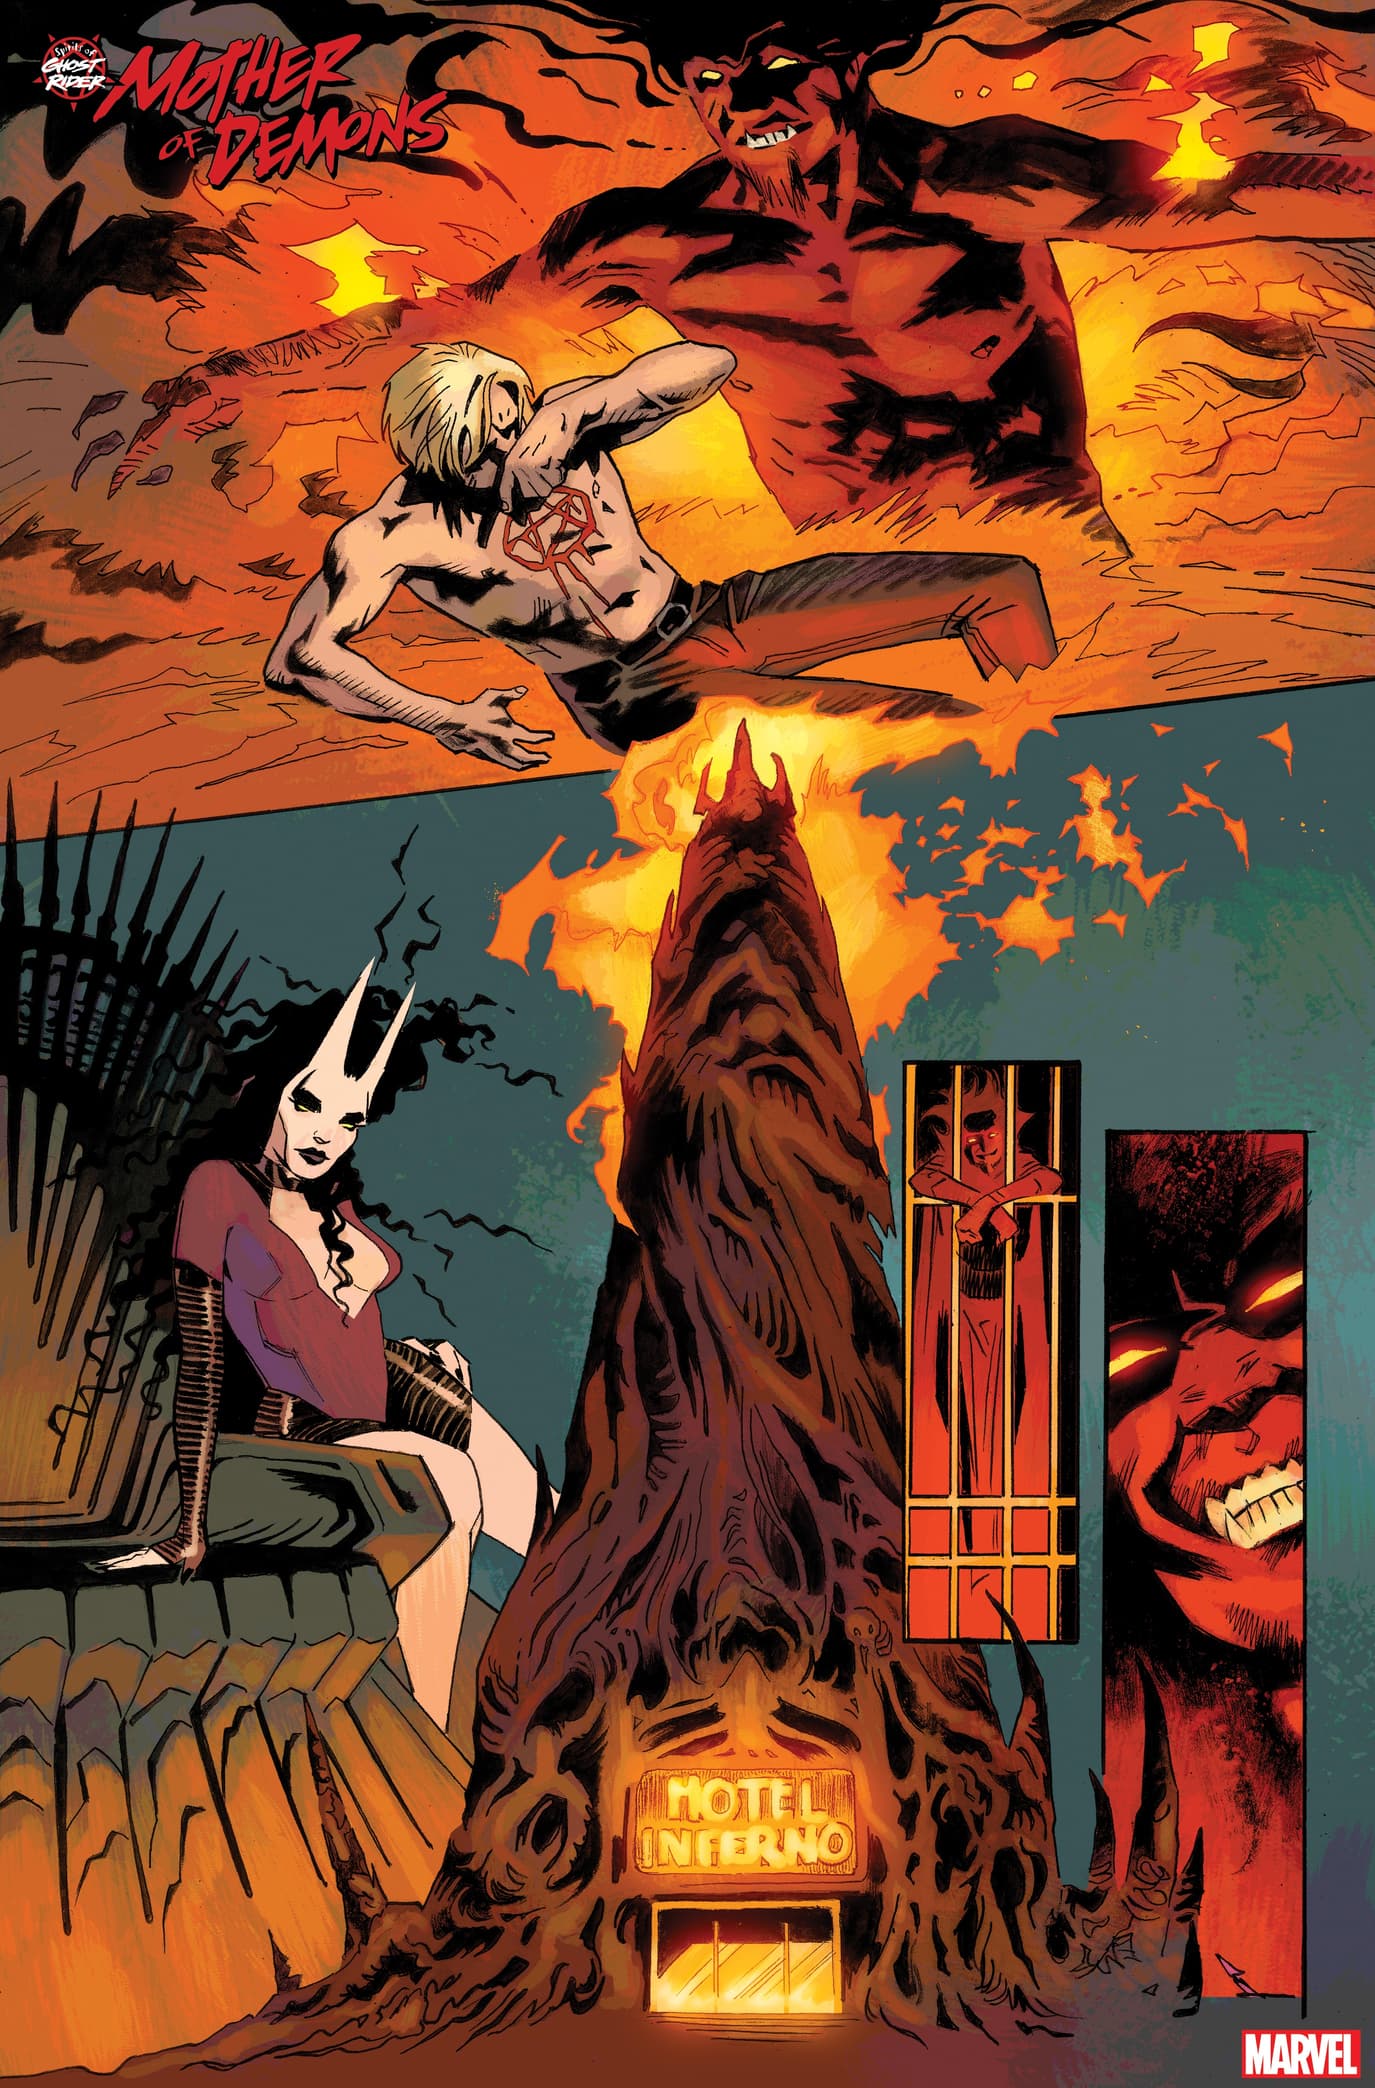 SPIRITS OF GHOST RIDER: MOTHER OF DEMONS #1 preview art by Roland Boschi and Dan Brown